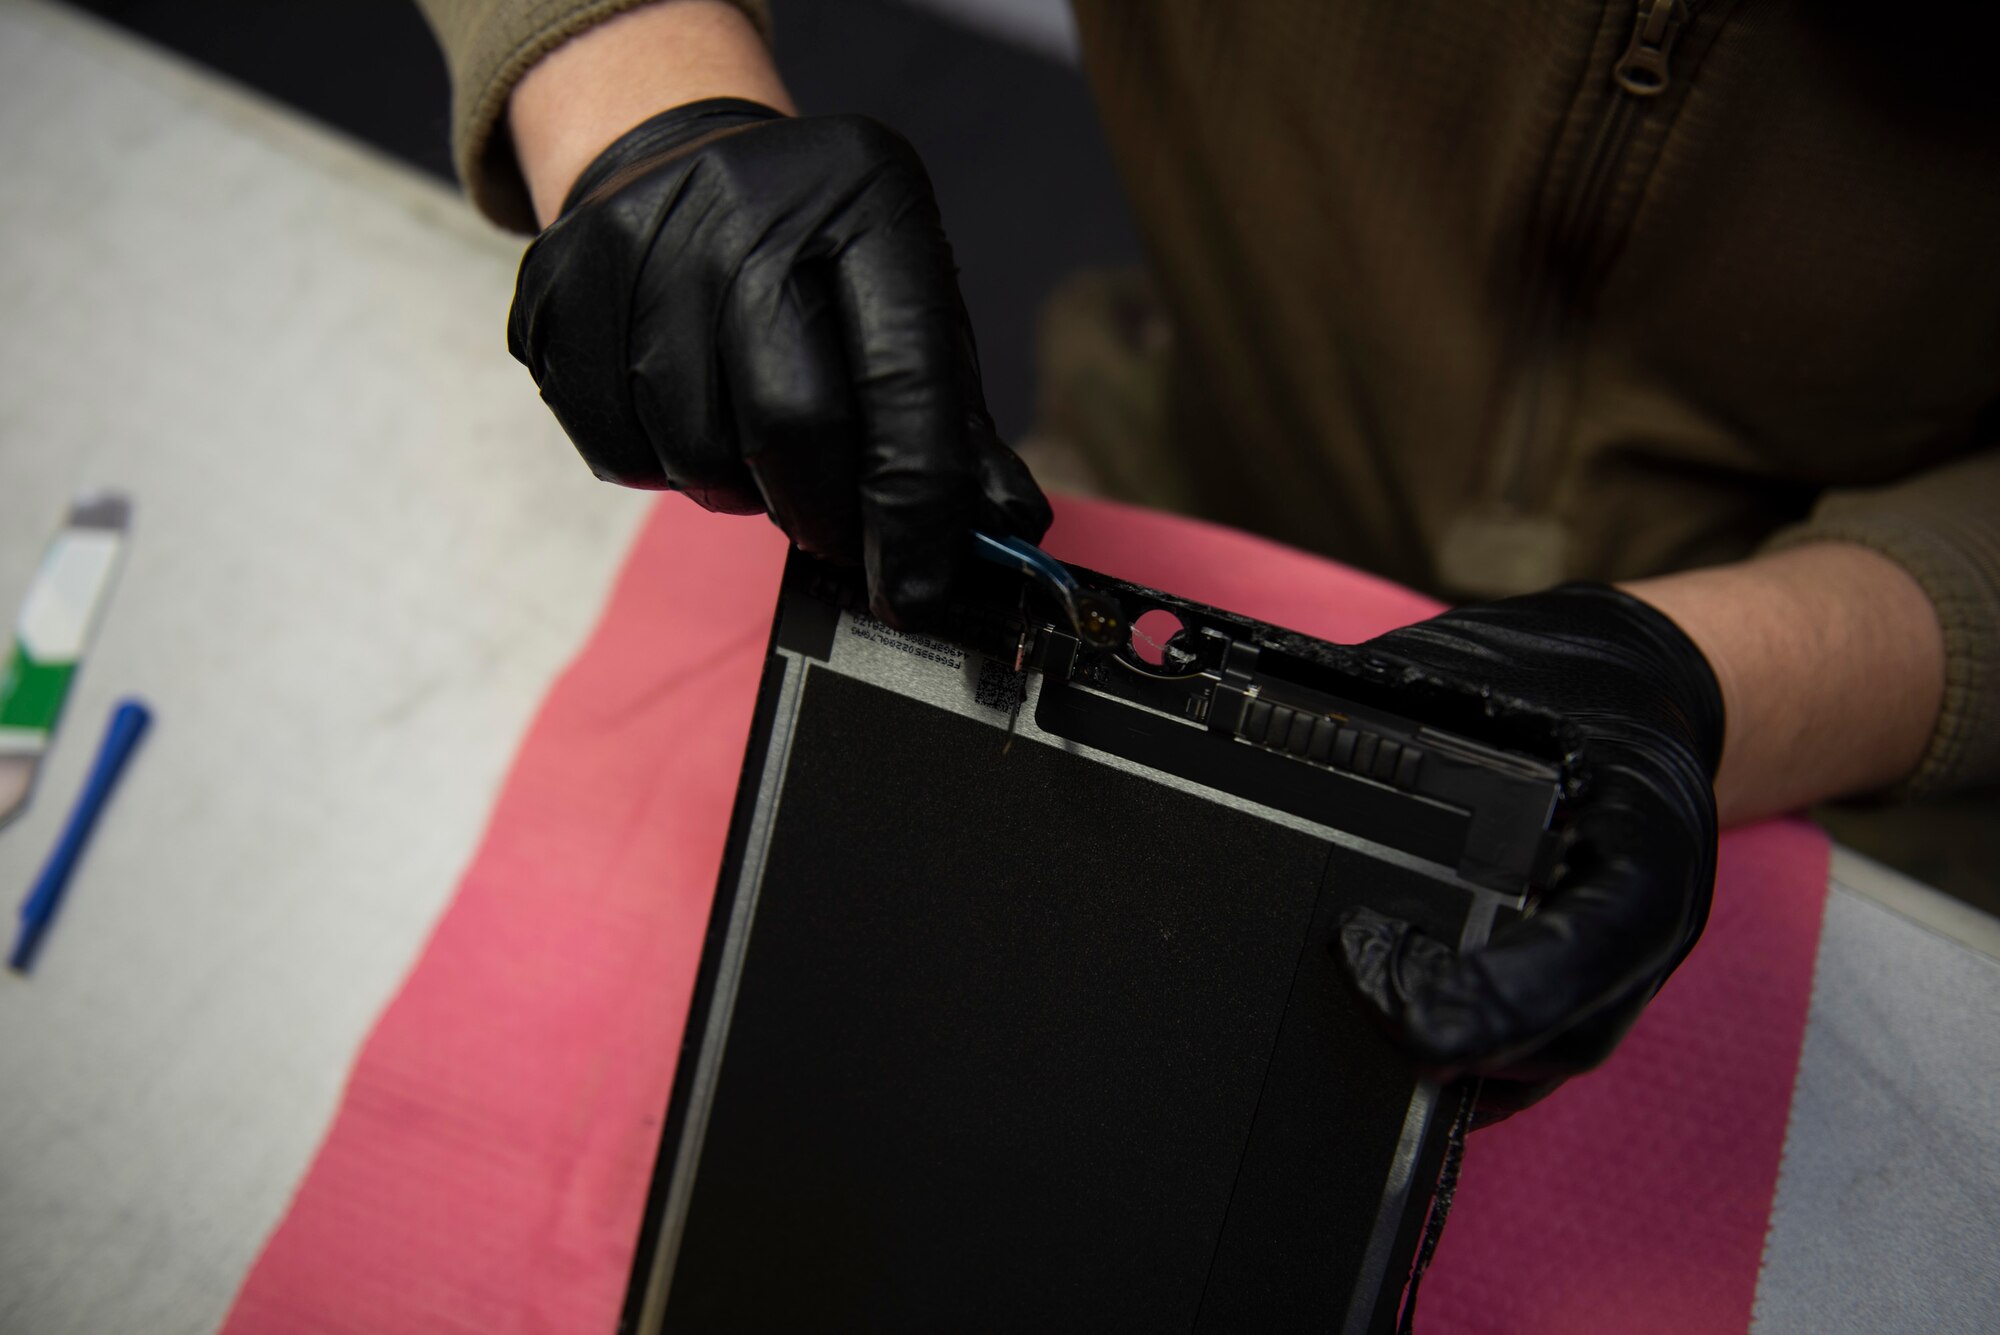 A photo of an Airman removing a home button from a tablet